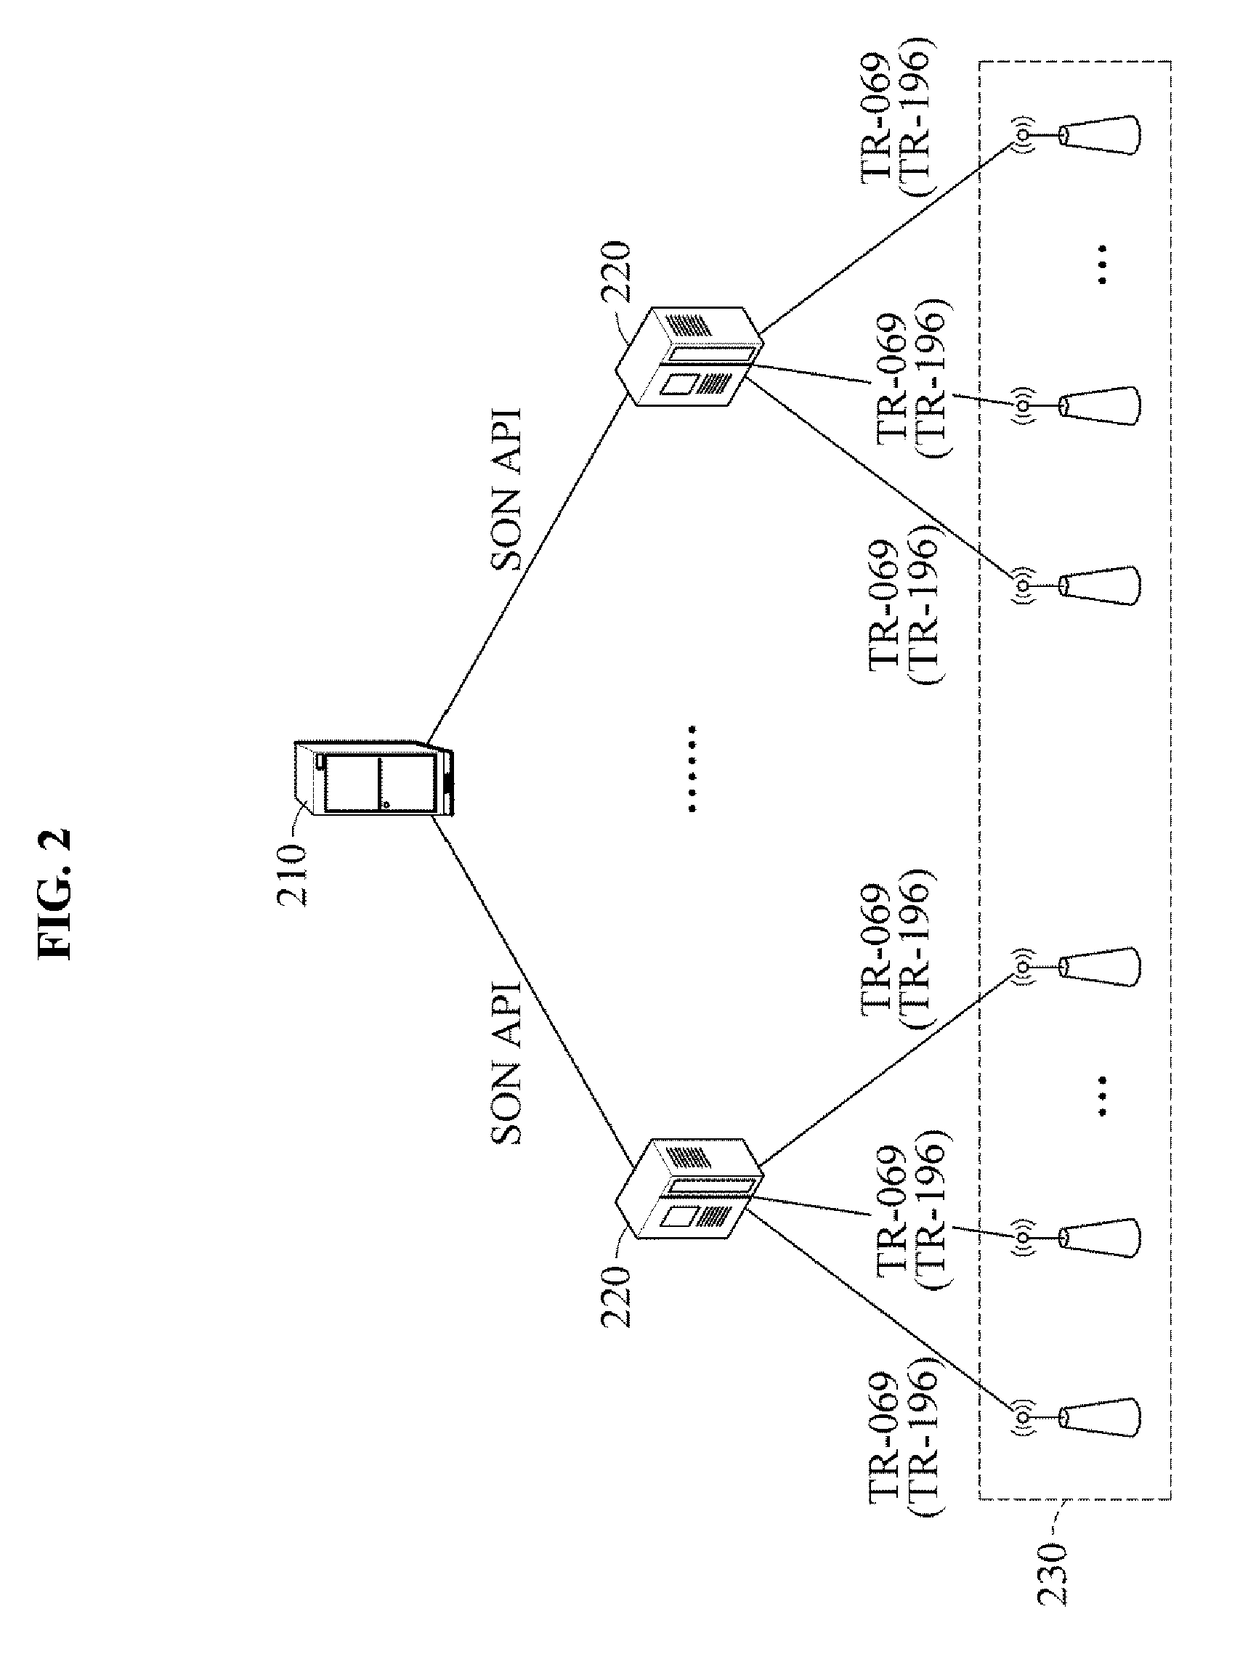 Self-organizing network (SON) system and operating method of the same